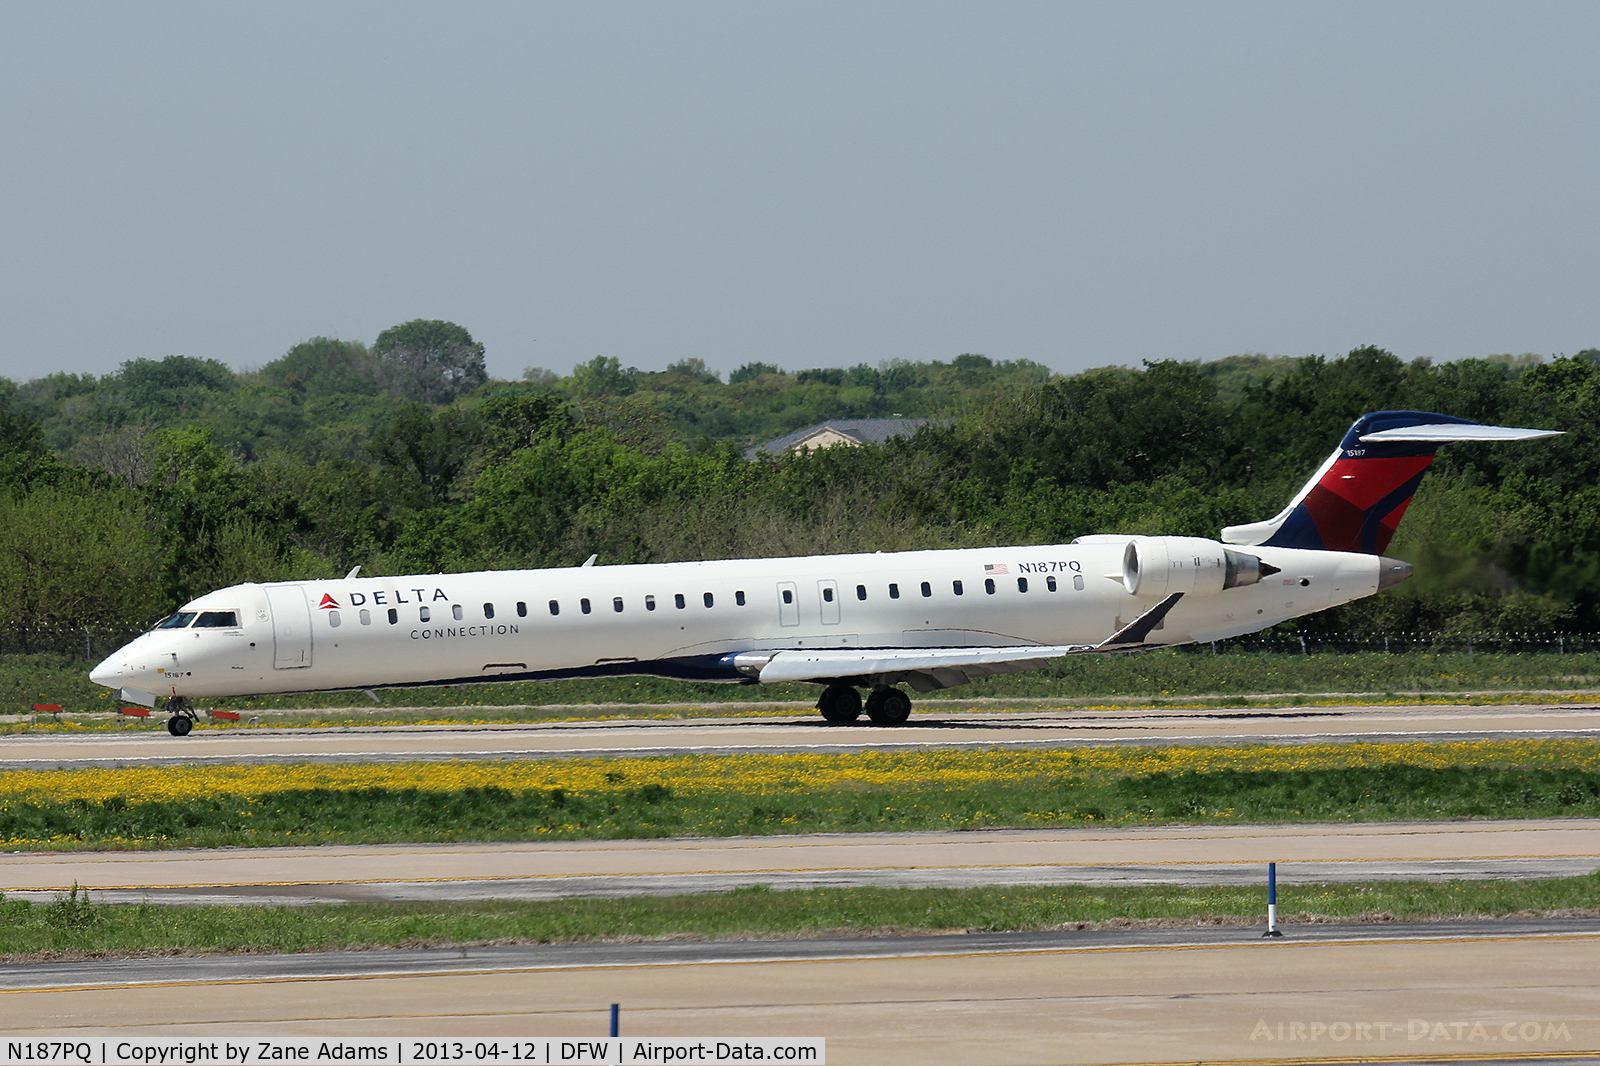 N187PQ, 2008 Bombardier CRJ-900ER (CL-600-2D24) C/N 15187, Delta Airlines at DFW Airport